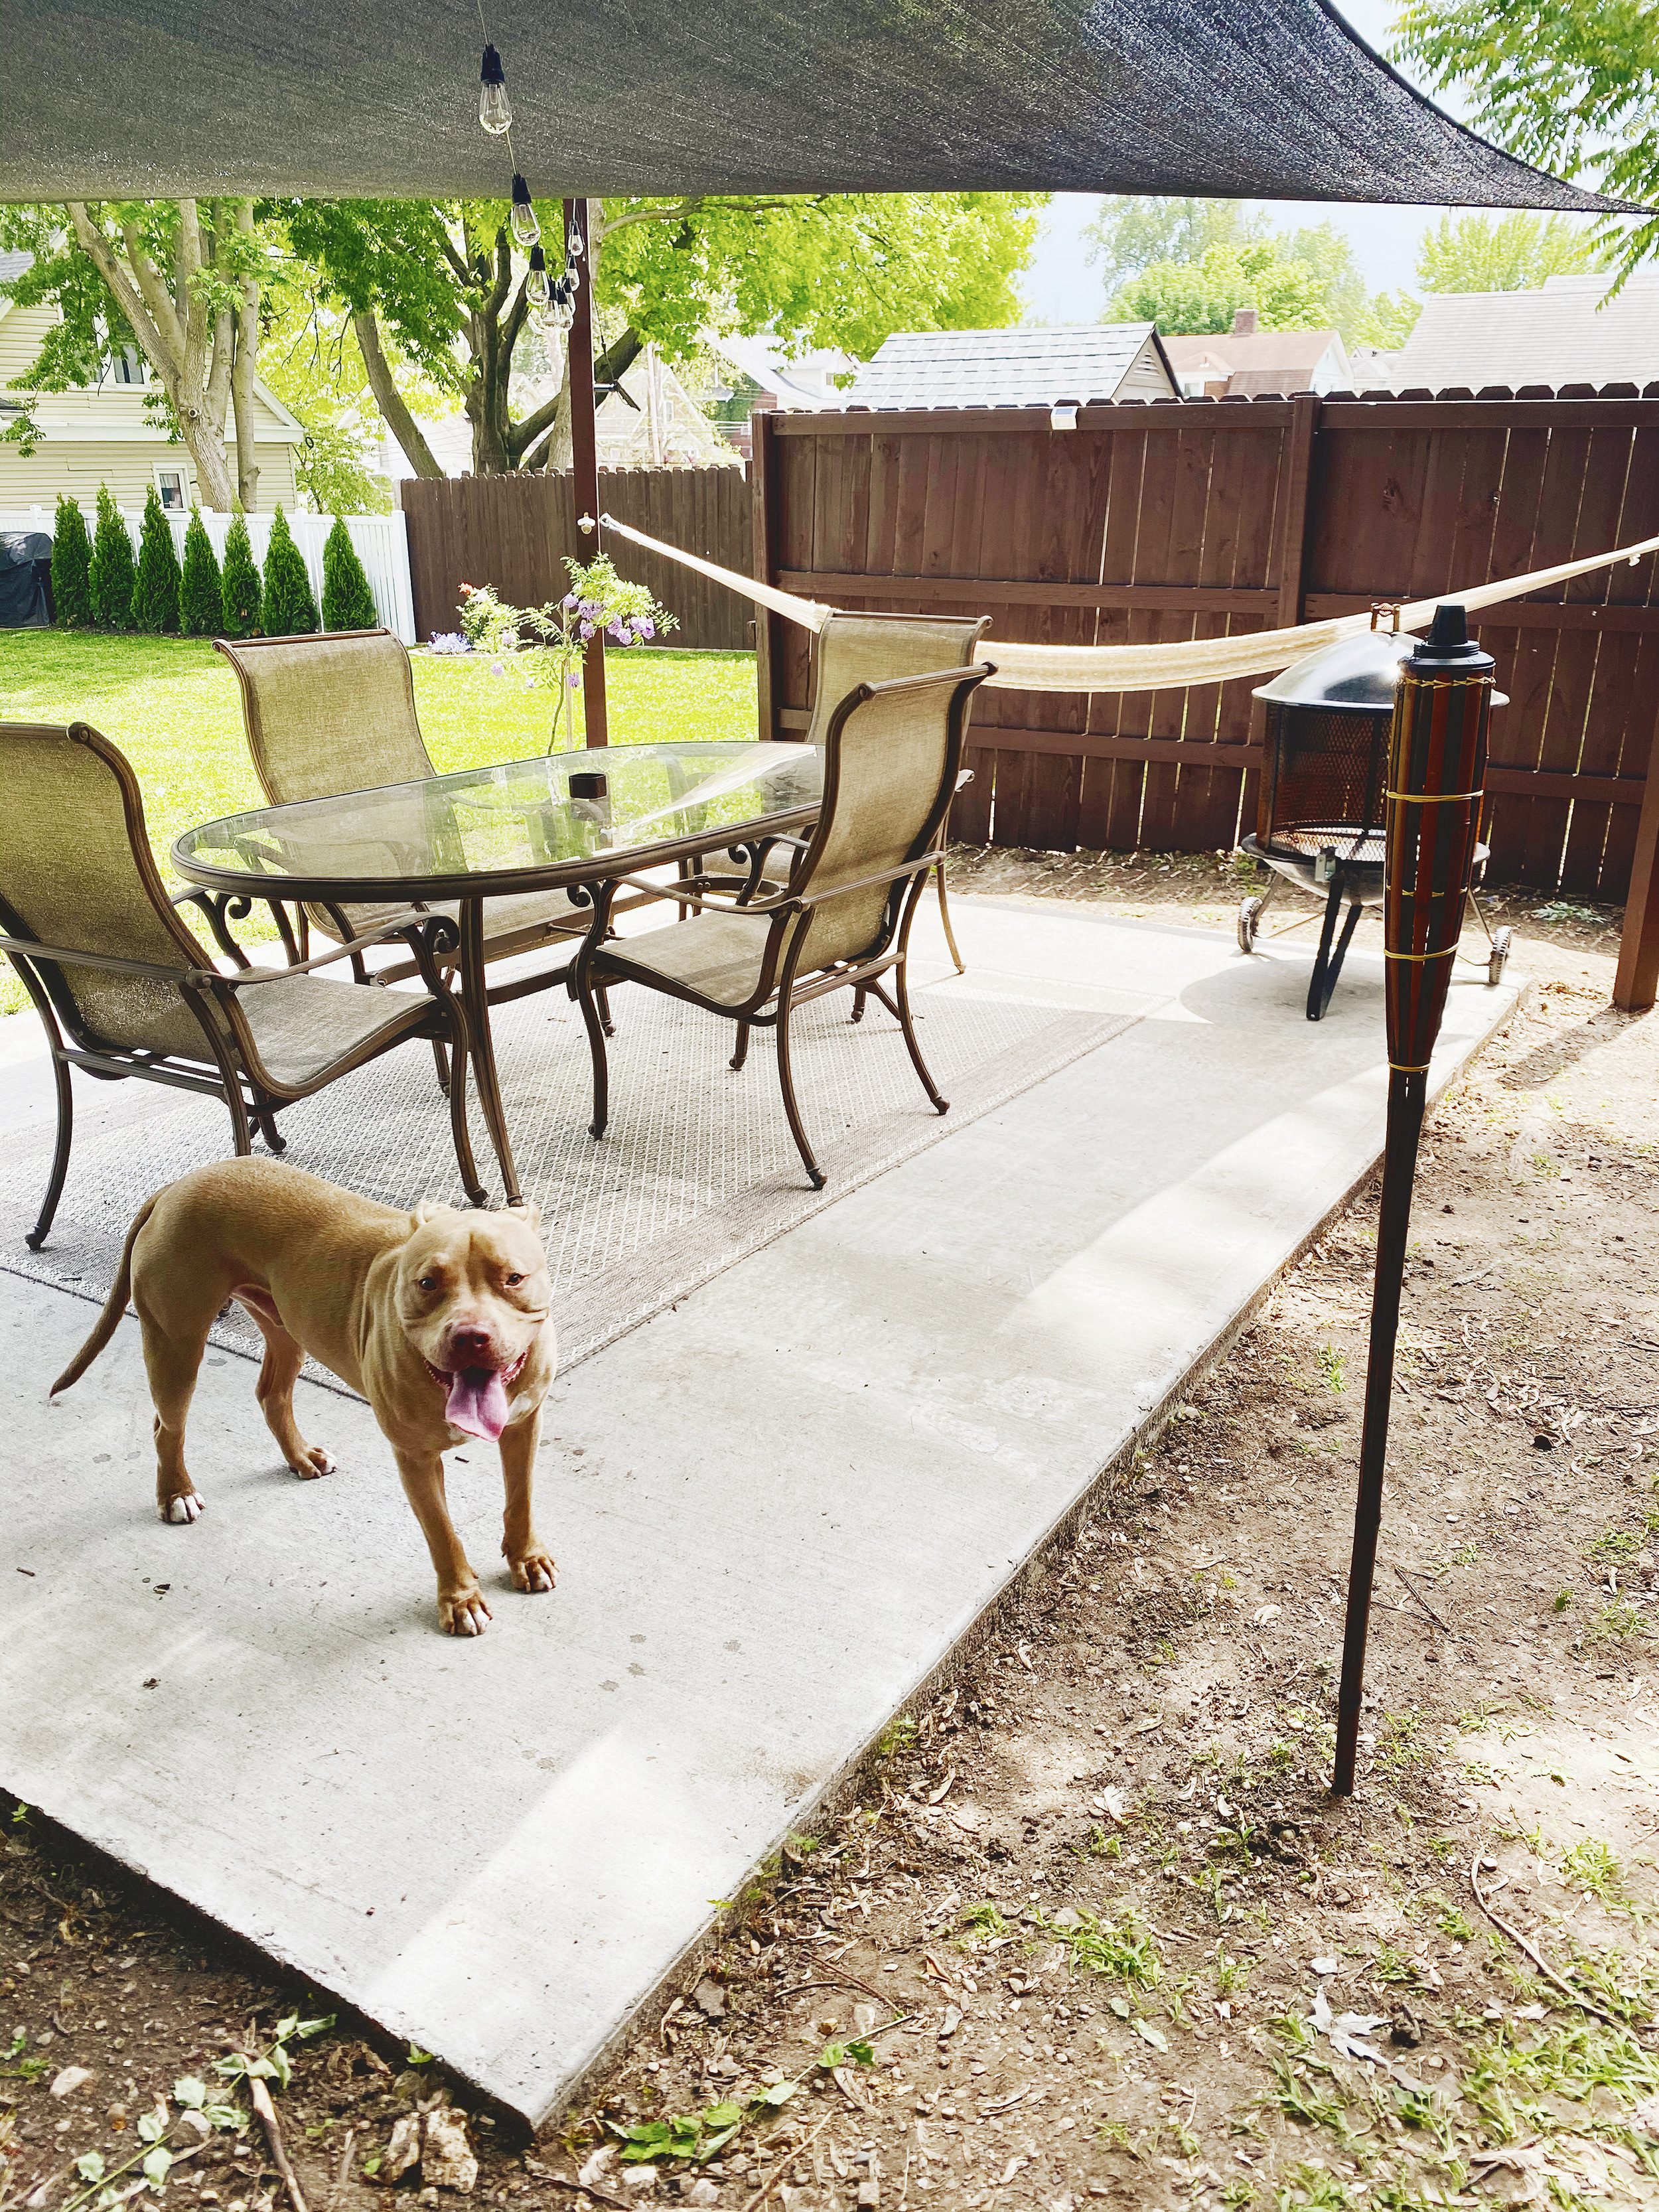 A tan pitbull stands on a concrete patio with a table and chairs and a portable fire pit // via Yellow Brick Home